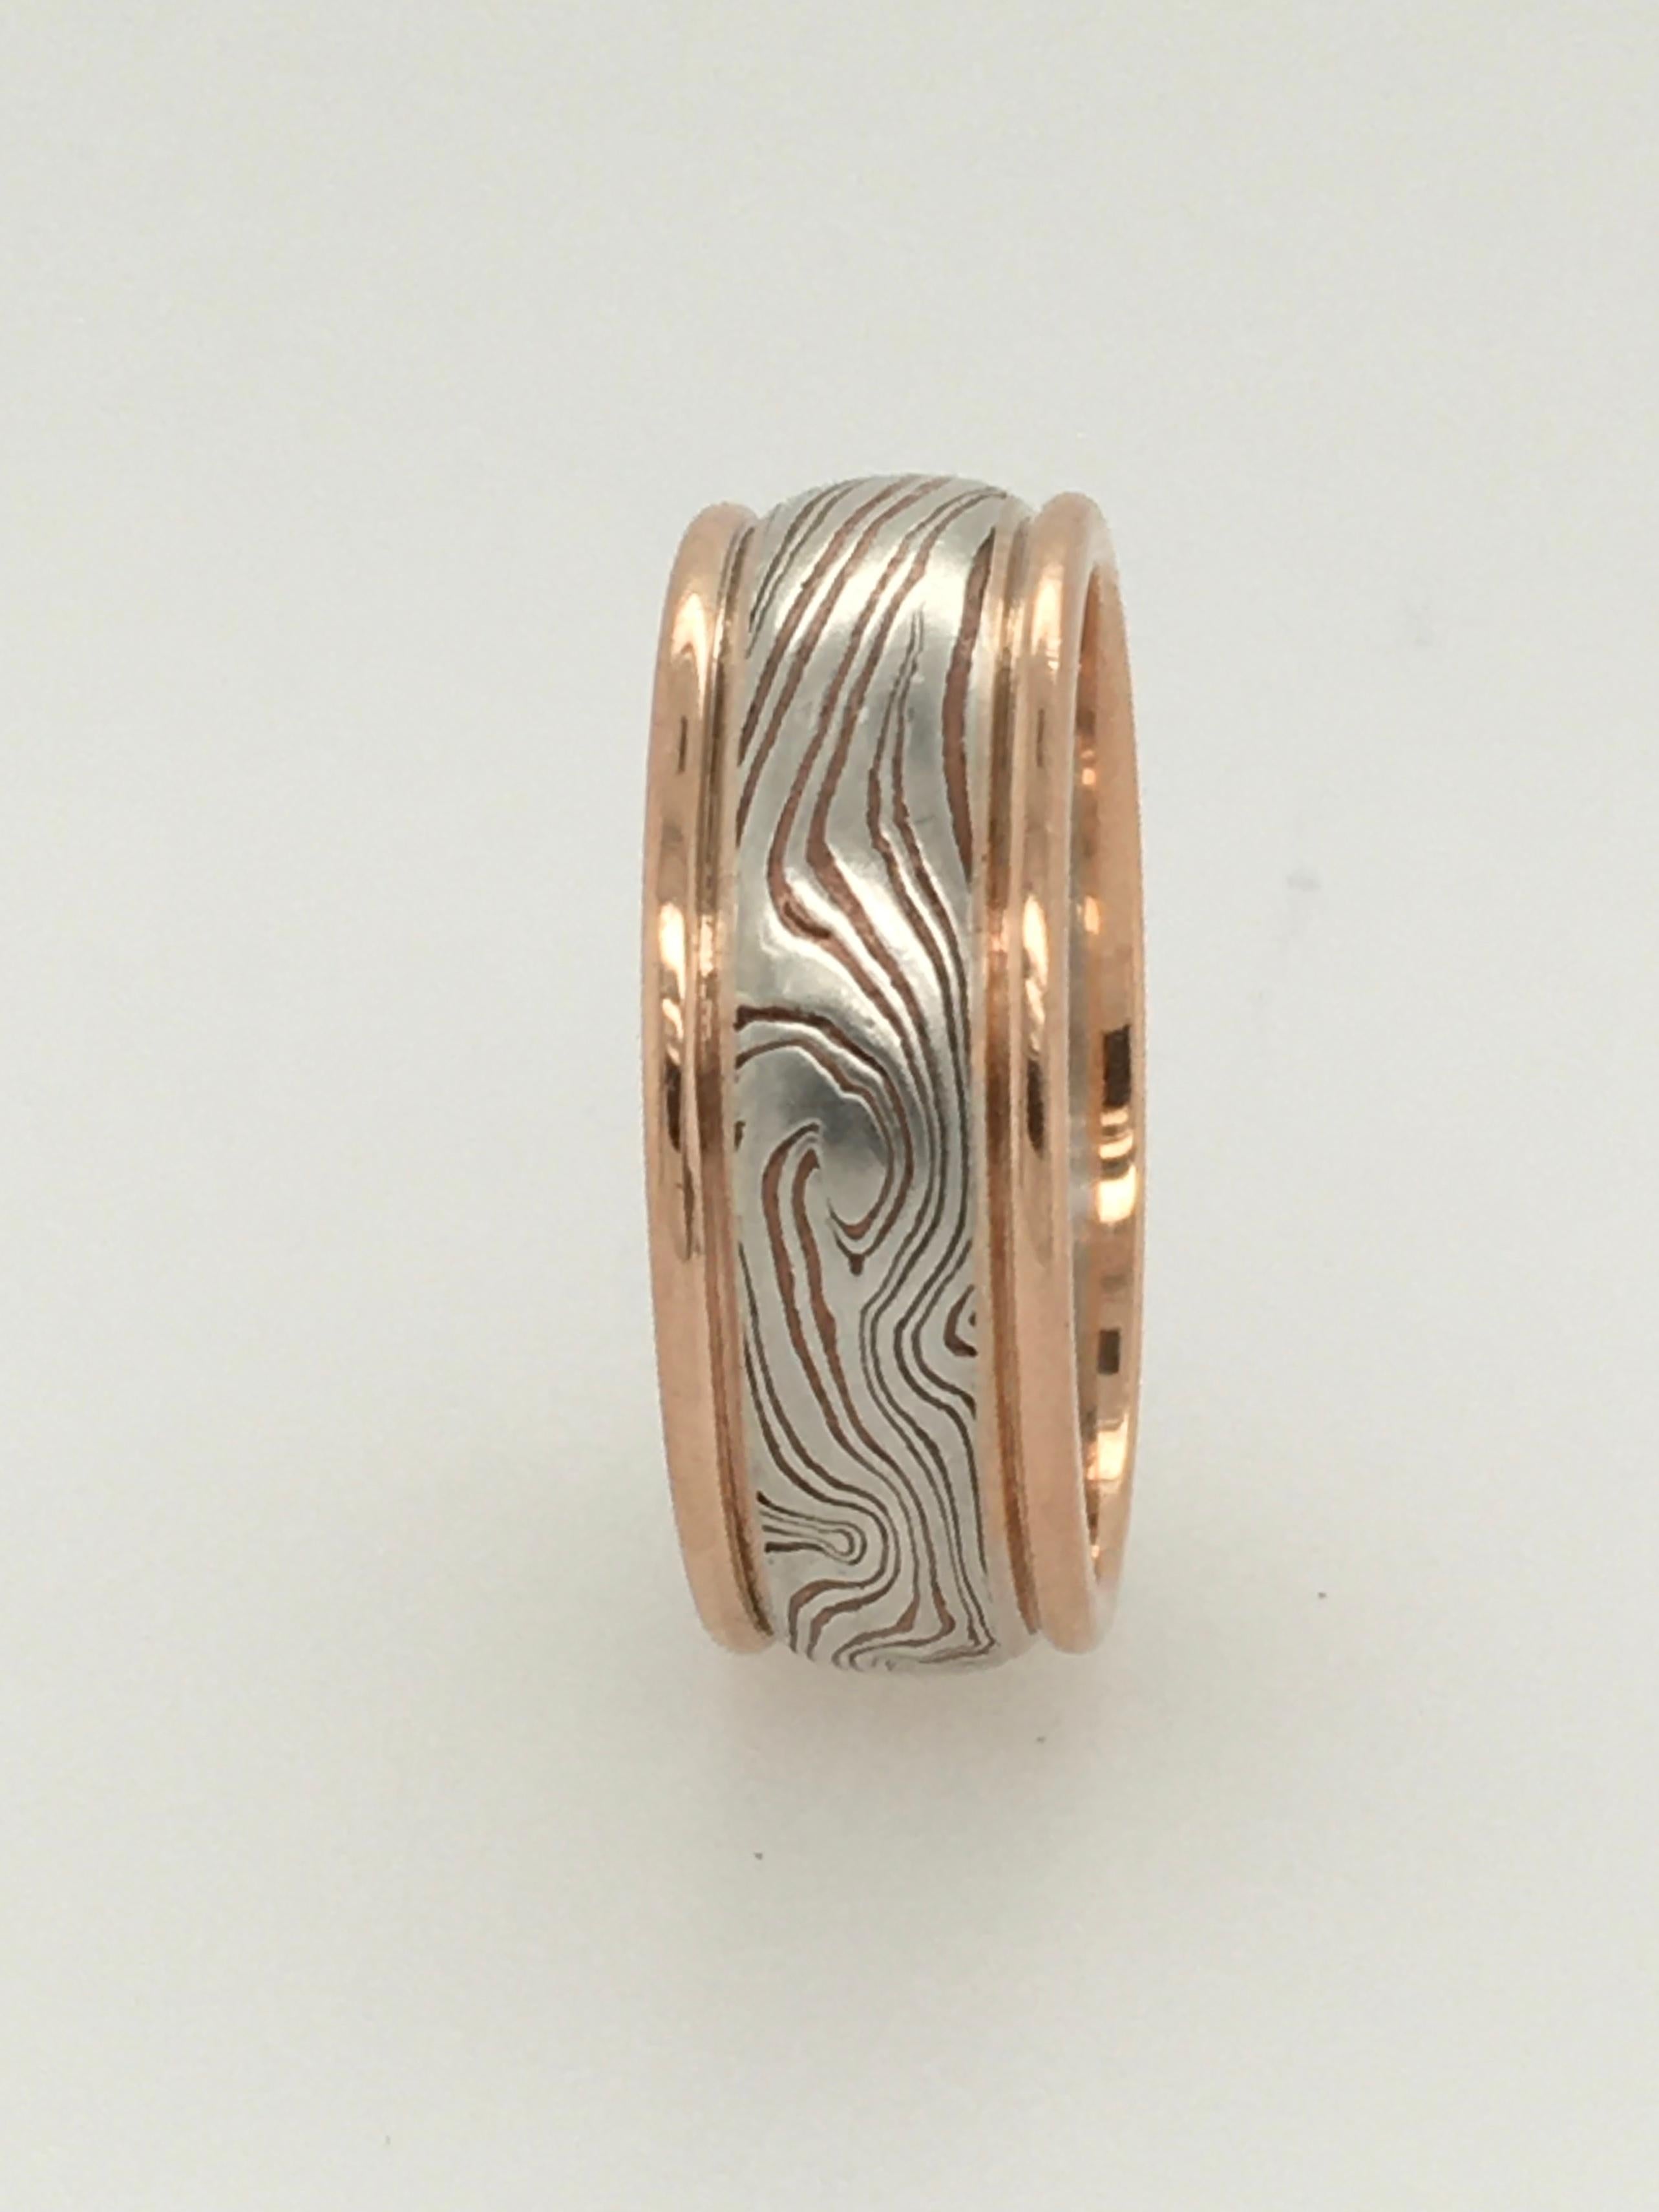 A striking round edge George Sawyer wedding band in the traditional Mokume style.  This 8 mm ring features 14K red gold edges that surround sterling silver & etched copper.   Interior stamp 